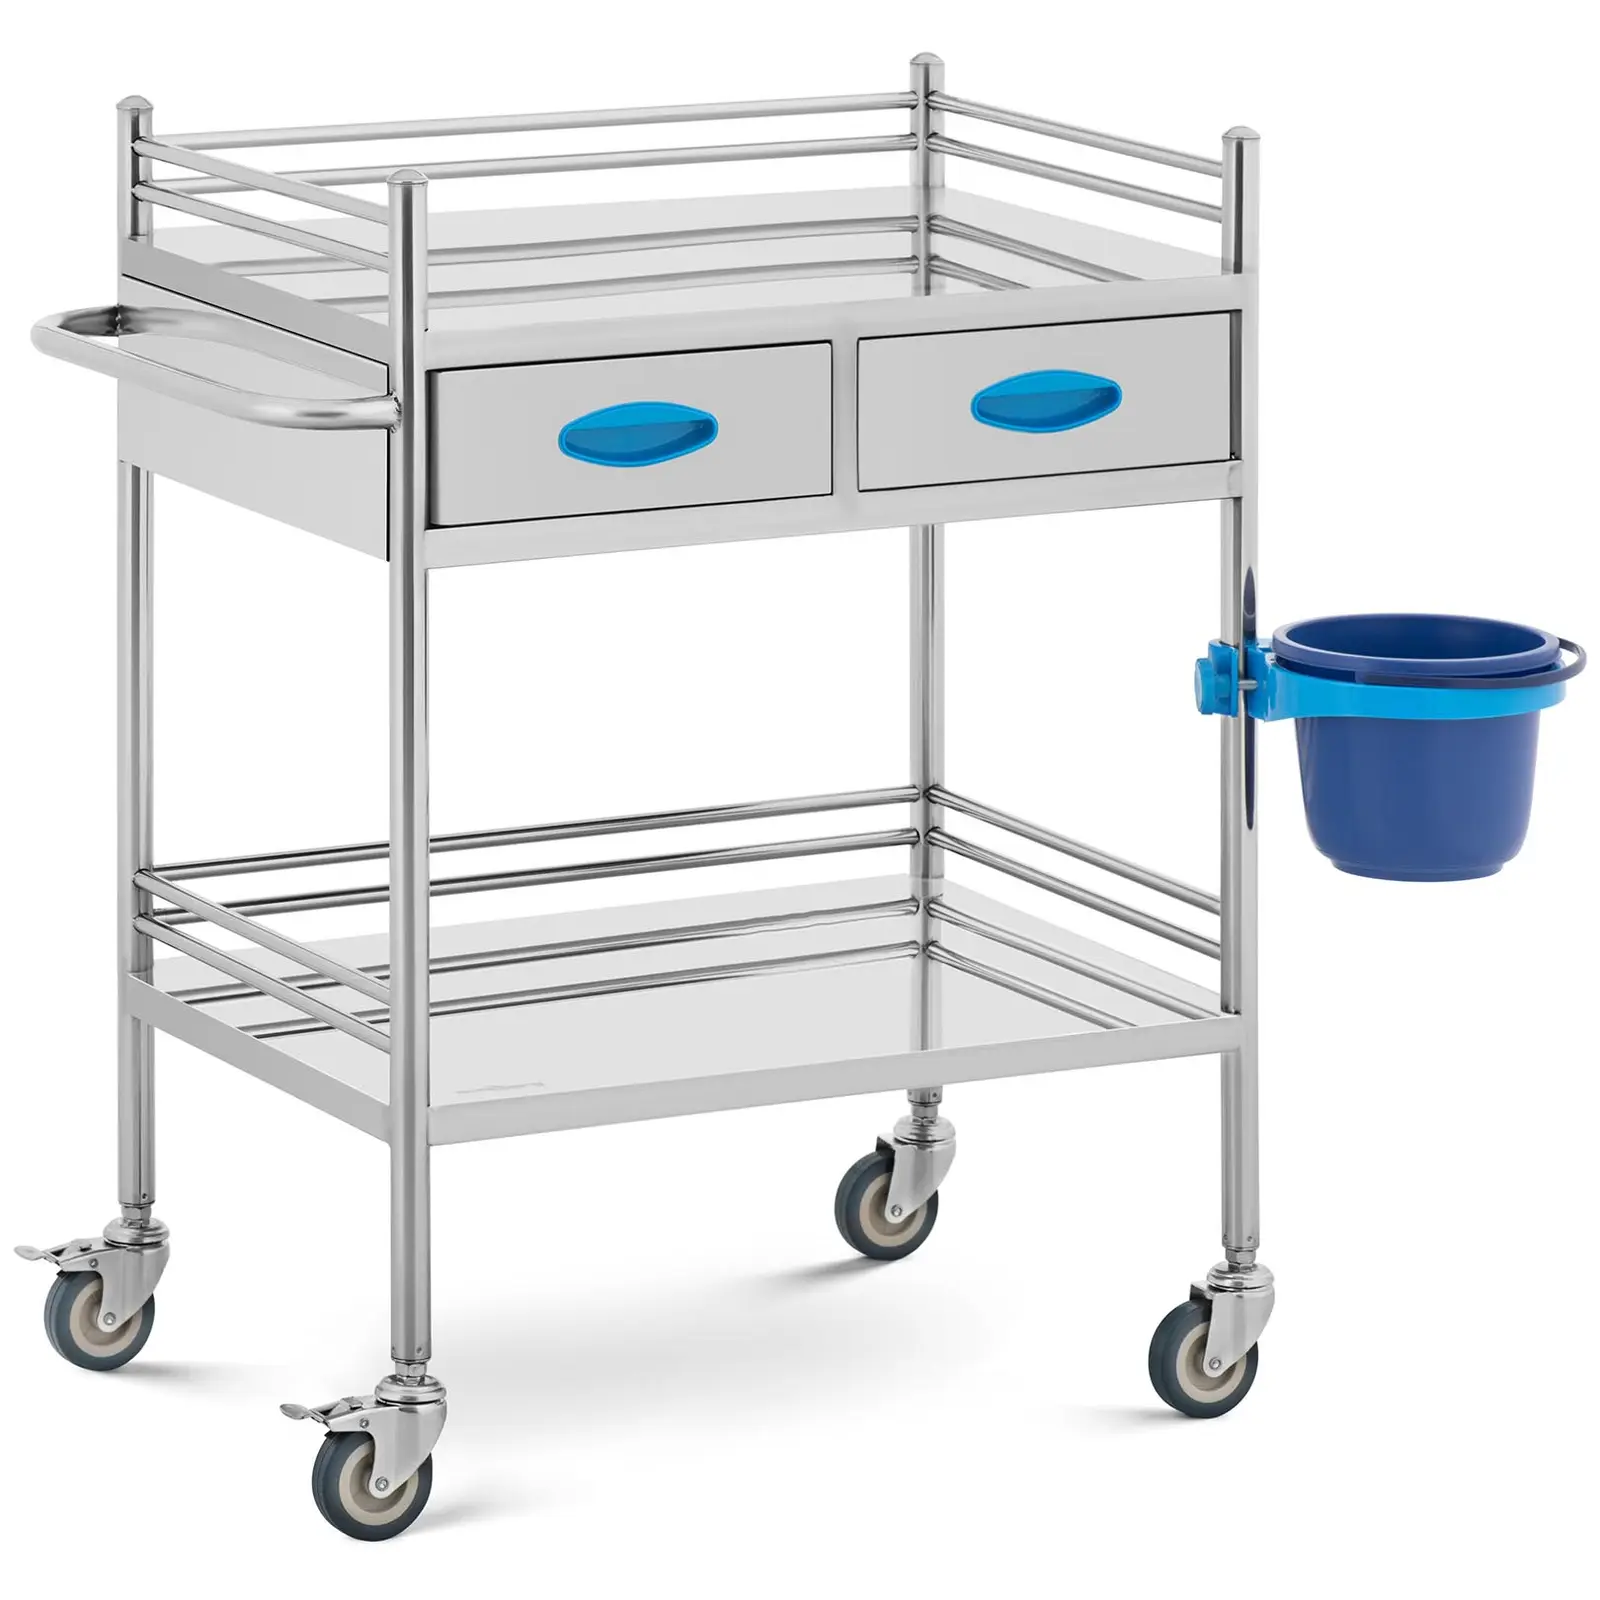 Laboratory Trolley - stainless steel - 2 shelves each 58 x 41 x 15 cm - 2 drawers - 40 kg